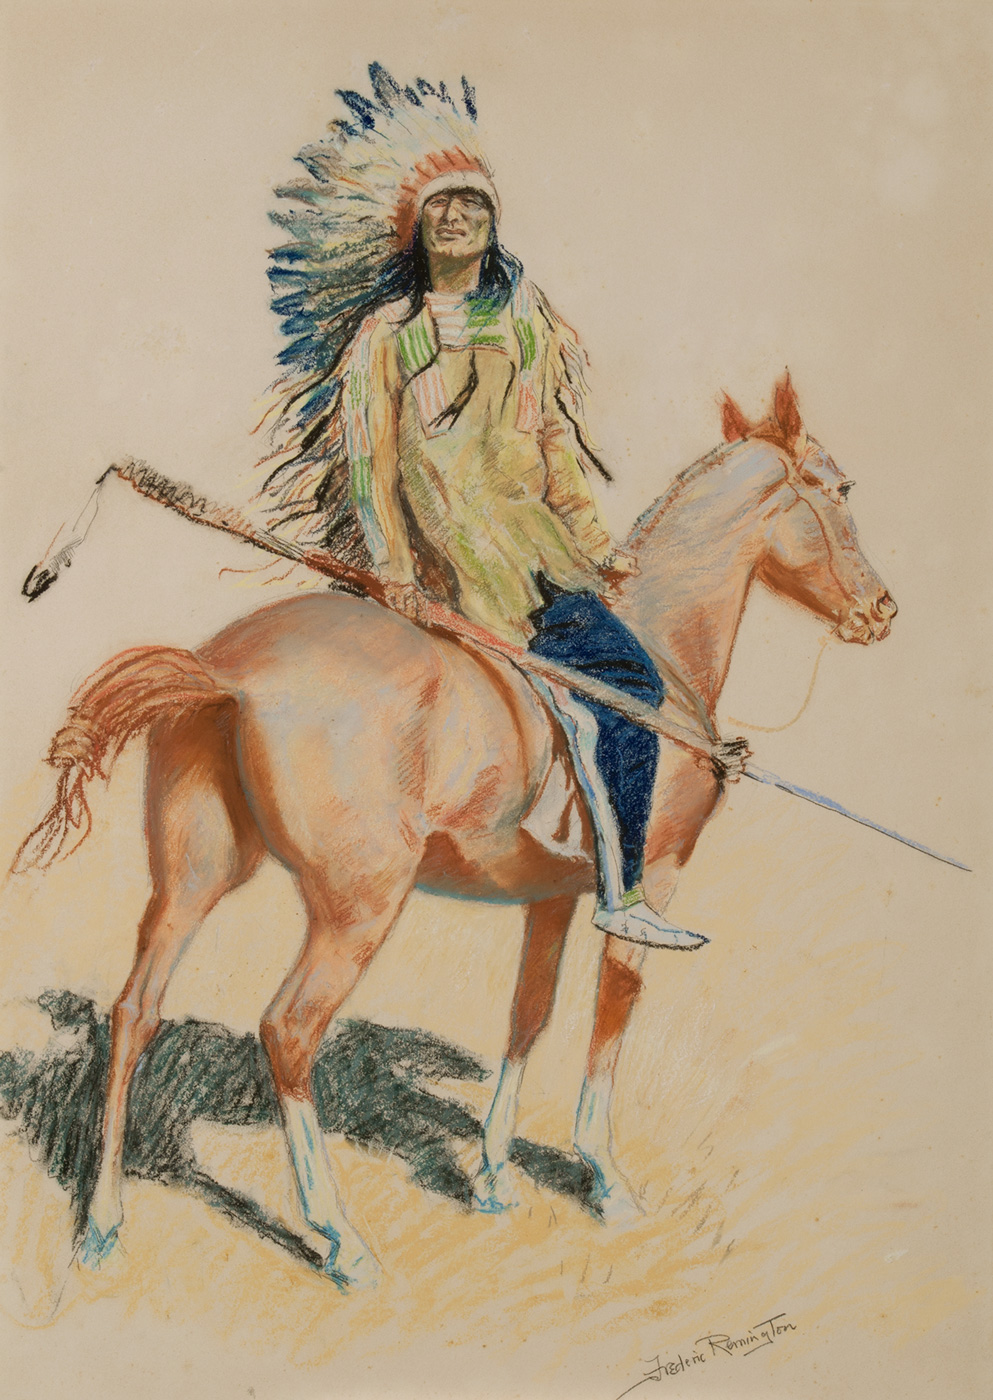 A Sioux chief in a headdress sits on a horse.